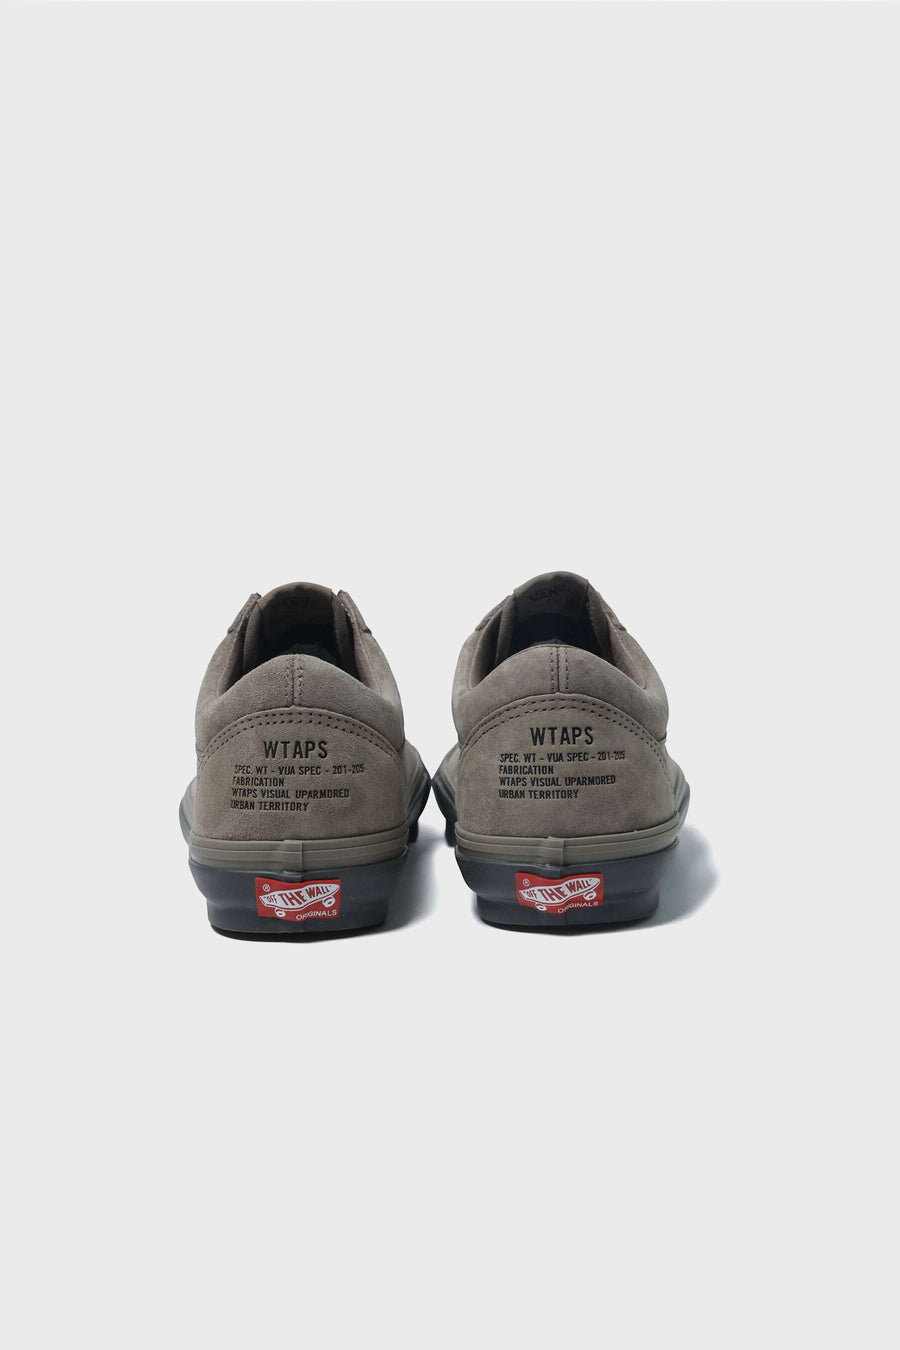 WTAPS OG Old Skool LX Coyote Brown 4P3XBMD (LAUNCH PRODUCT)